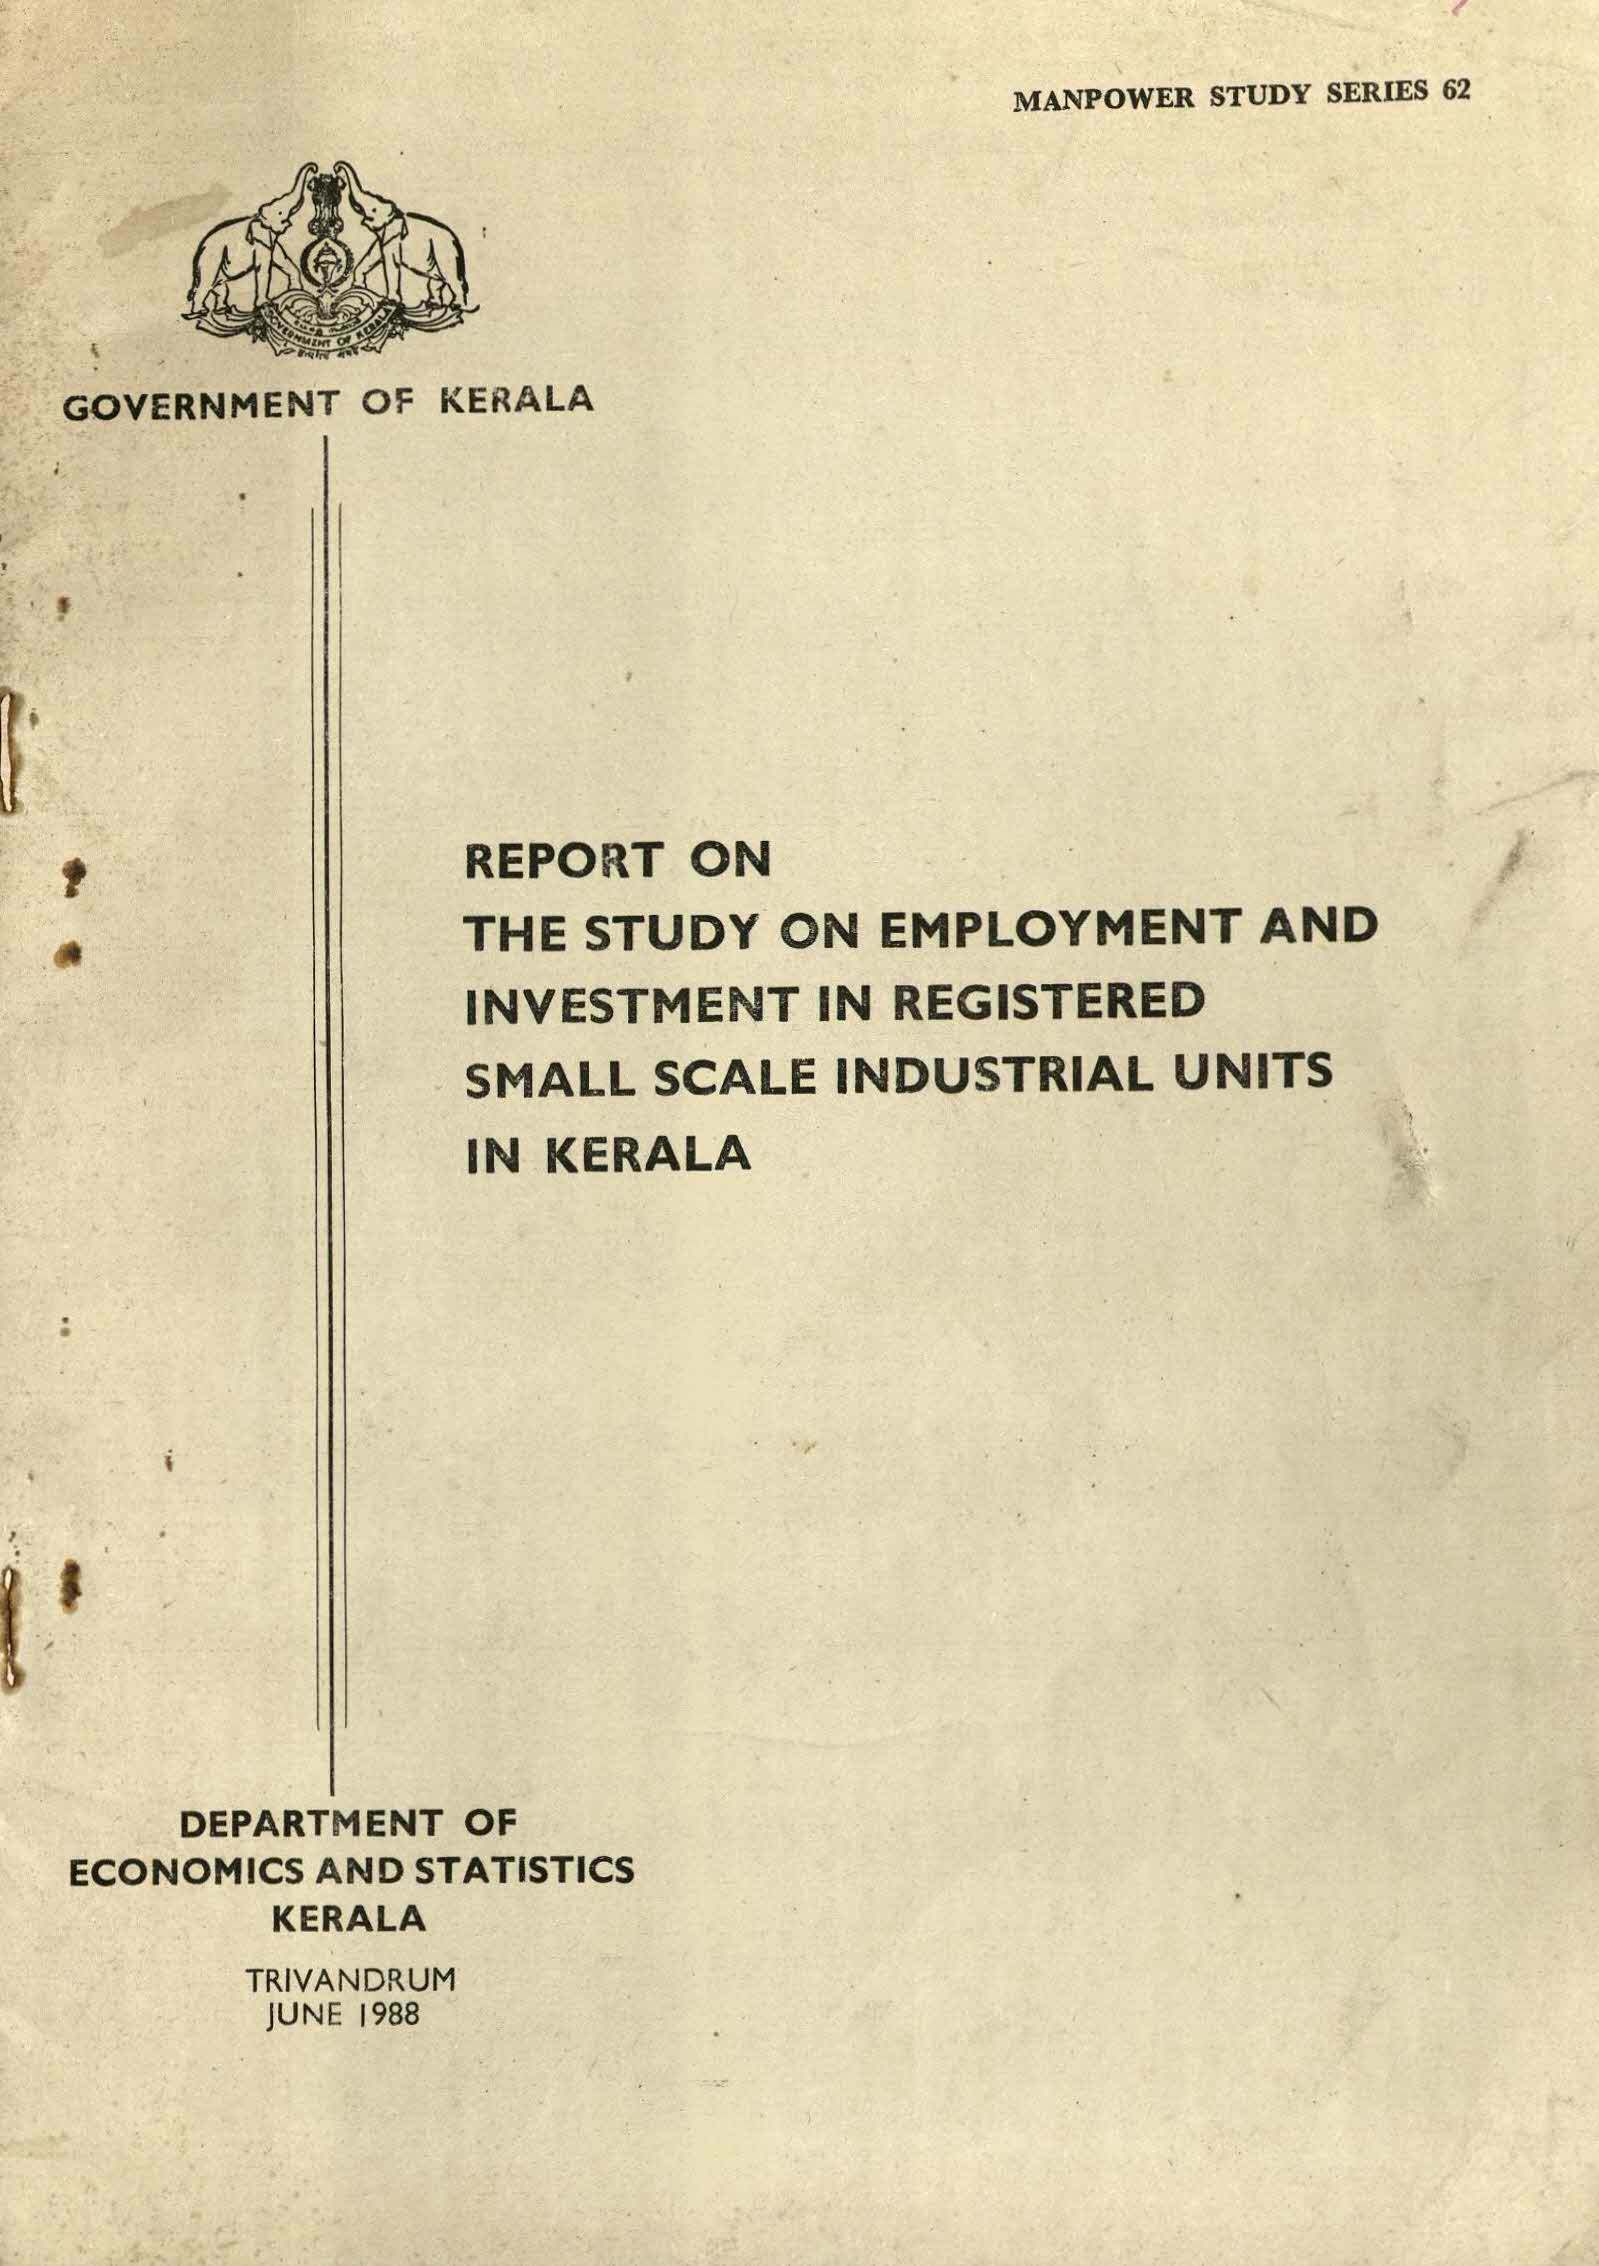 REPORT ON THE STUDY ON EMPLOYMENT AND INVESTMENT IN REGISTERED SMALL SCALE INDUSTRIAL IN KERALA